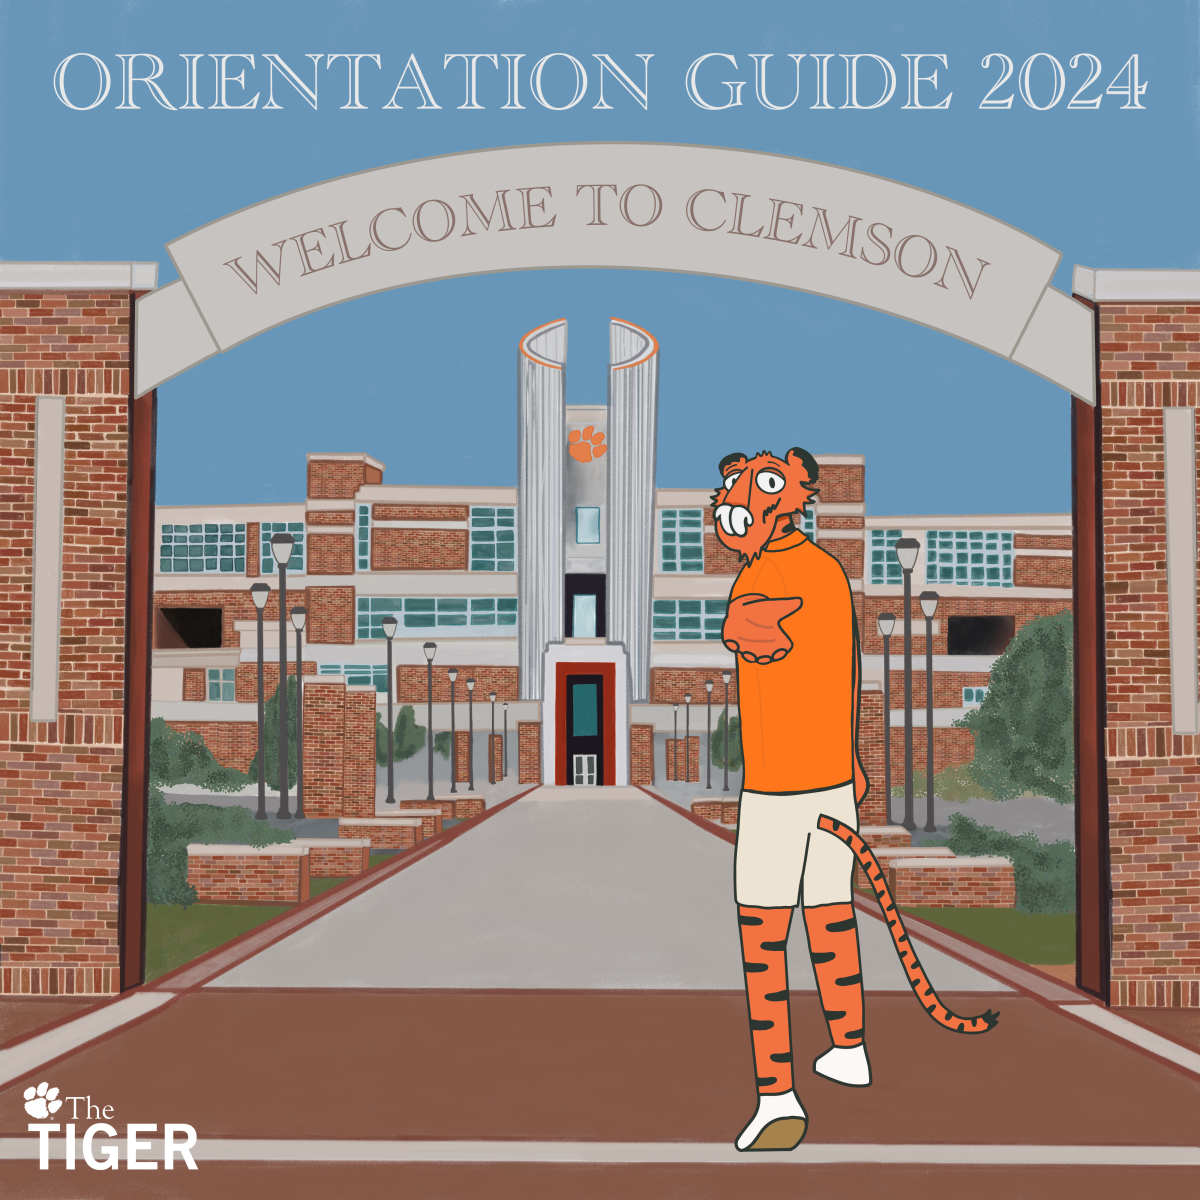 This years orientation guide serves as an overview of the important information all freshmen should know before August.